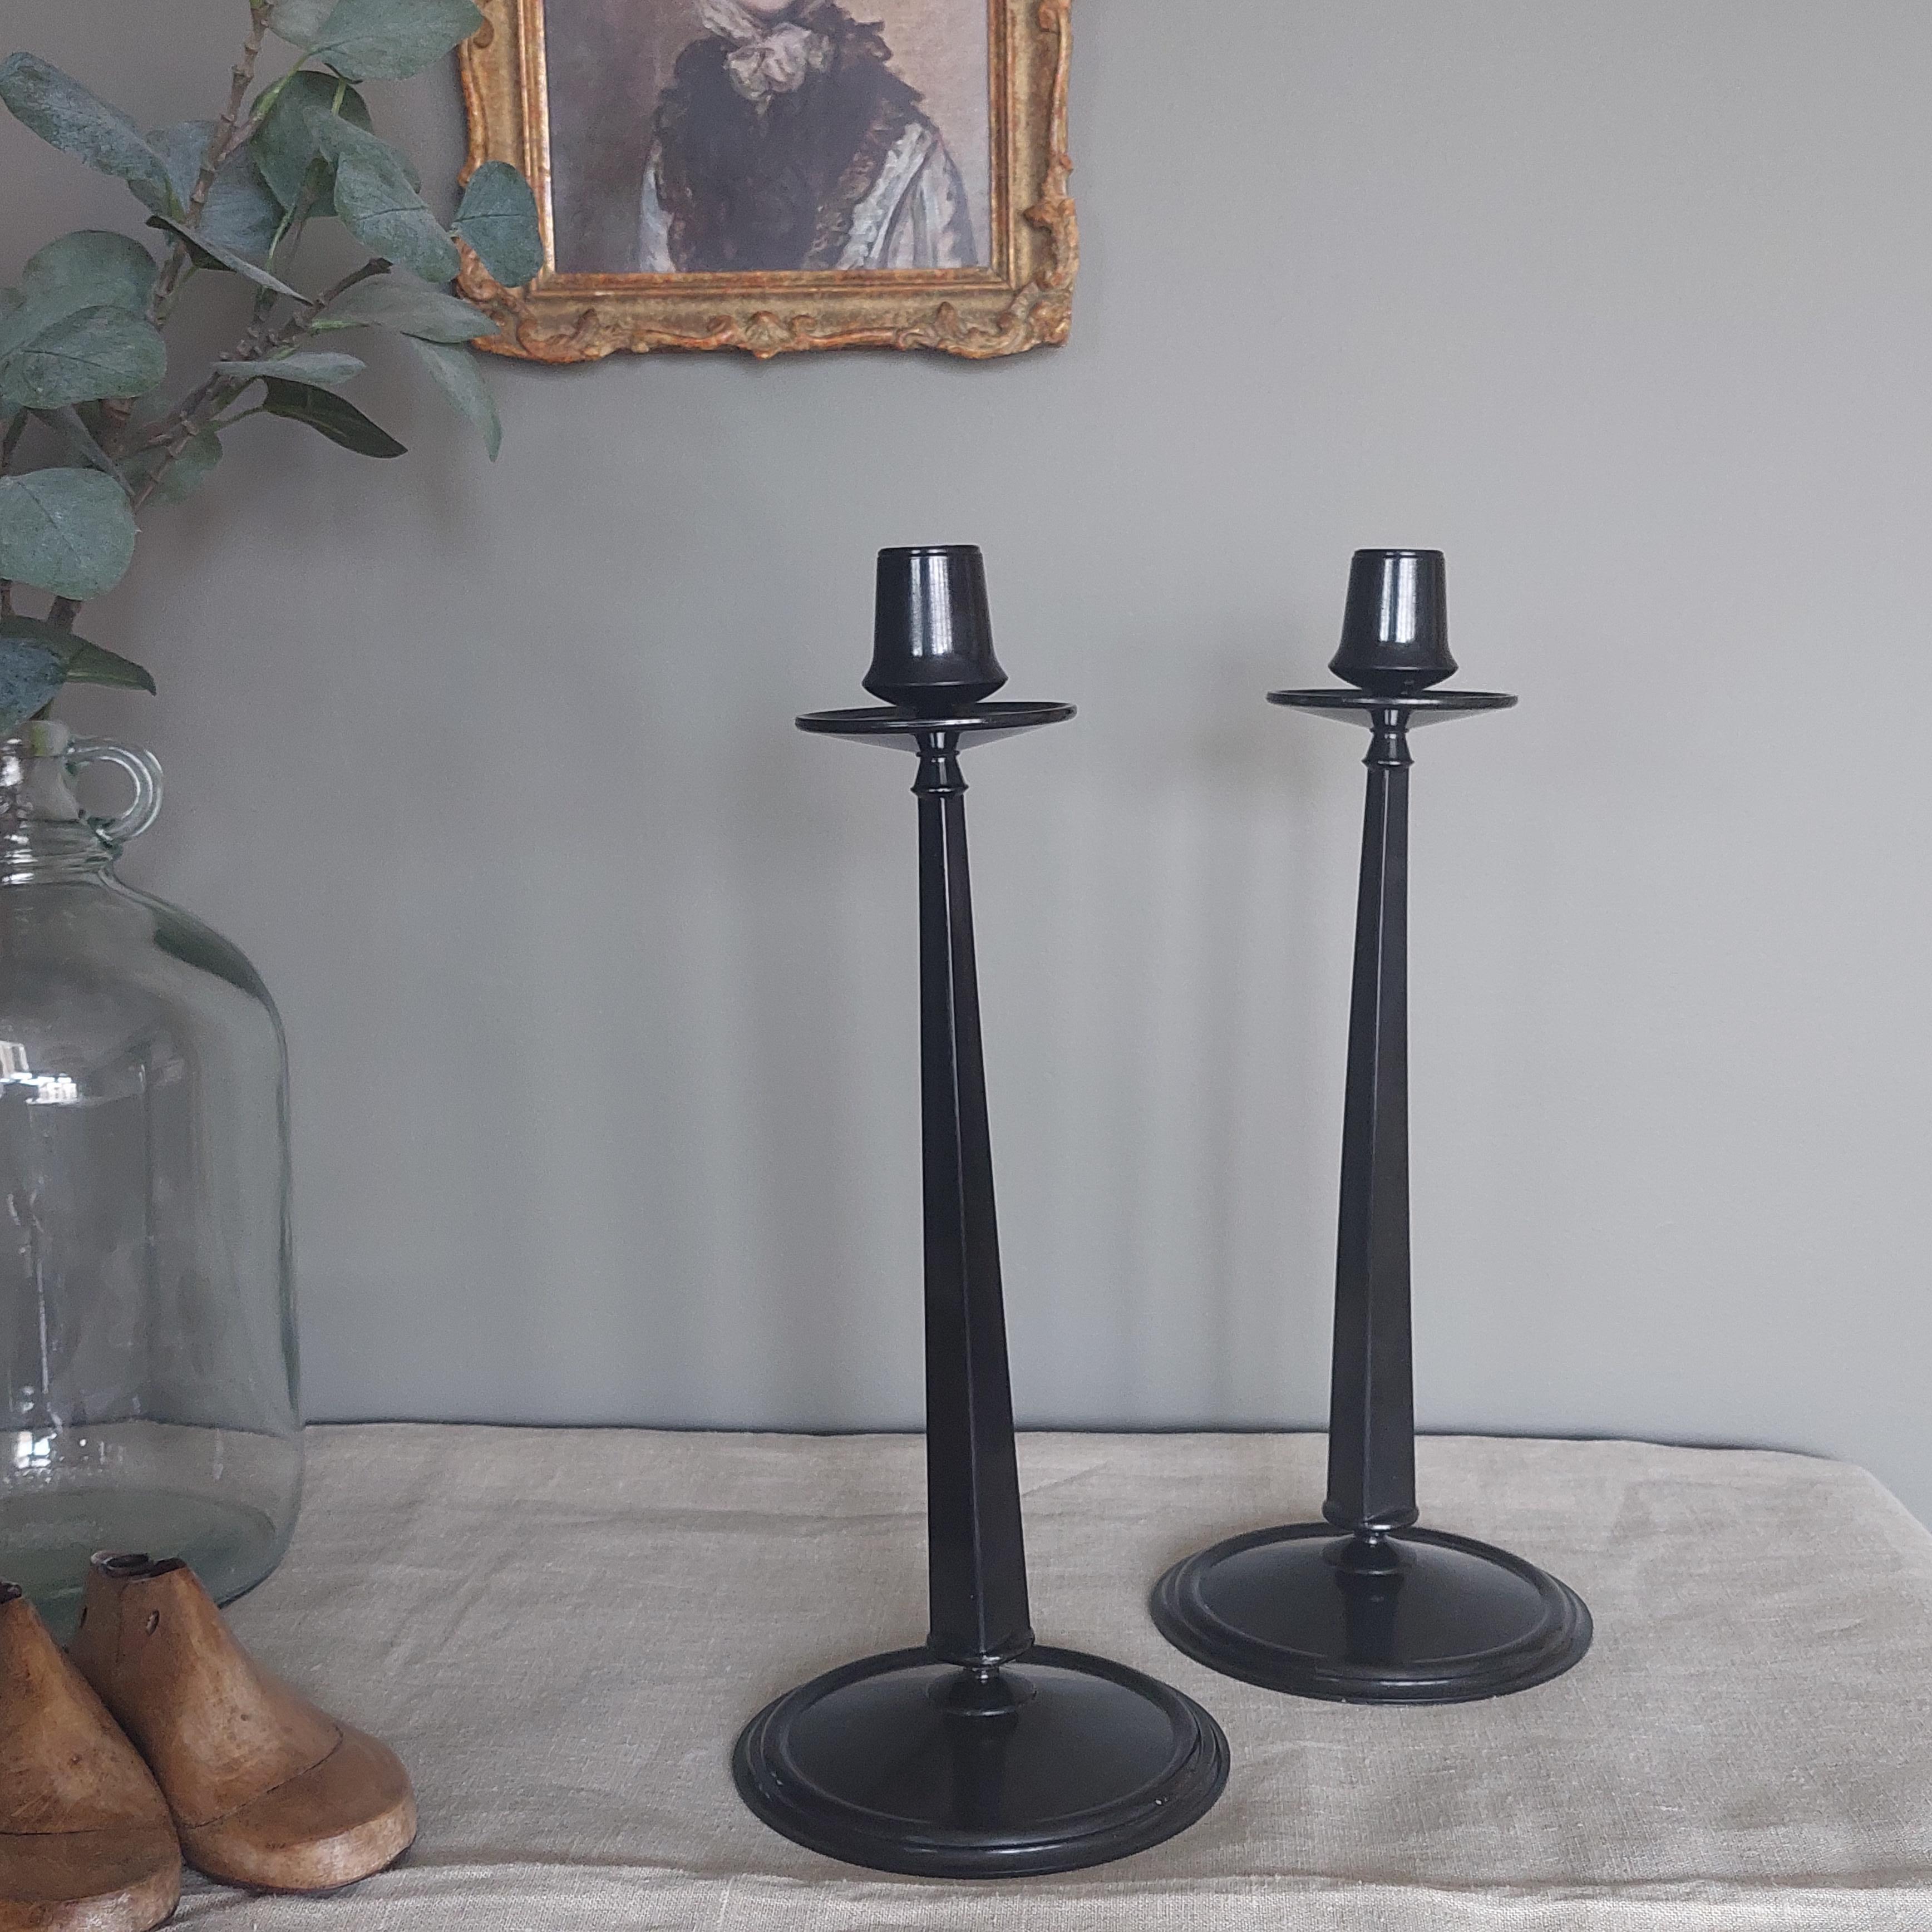 An elegant pair of Jugendstil tall tapered Bakelite candlesticks. 
This iconic Bakelite candlestick is pictured in all the reference books about collectible Bakelite.

These pieces were manufactured by Linsden Ware, England, in the late 1920s on an